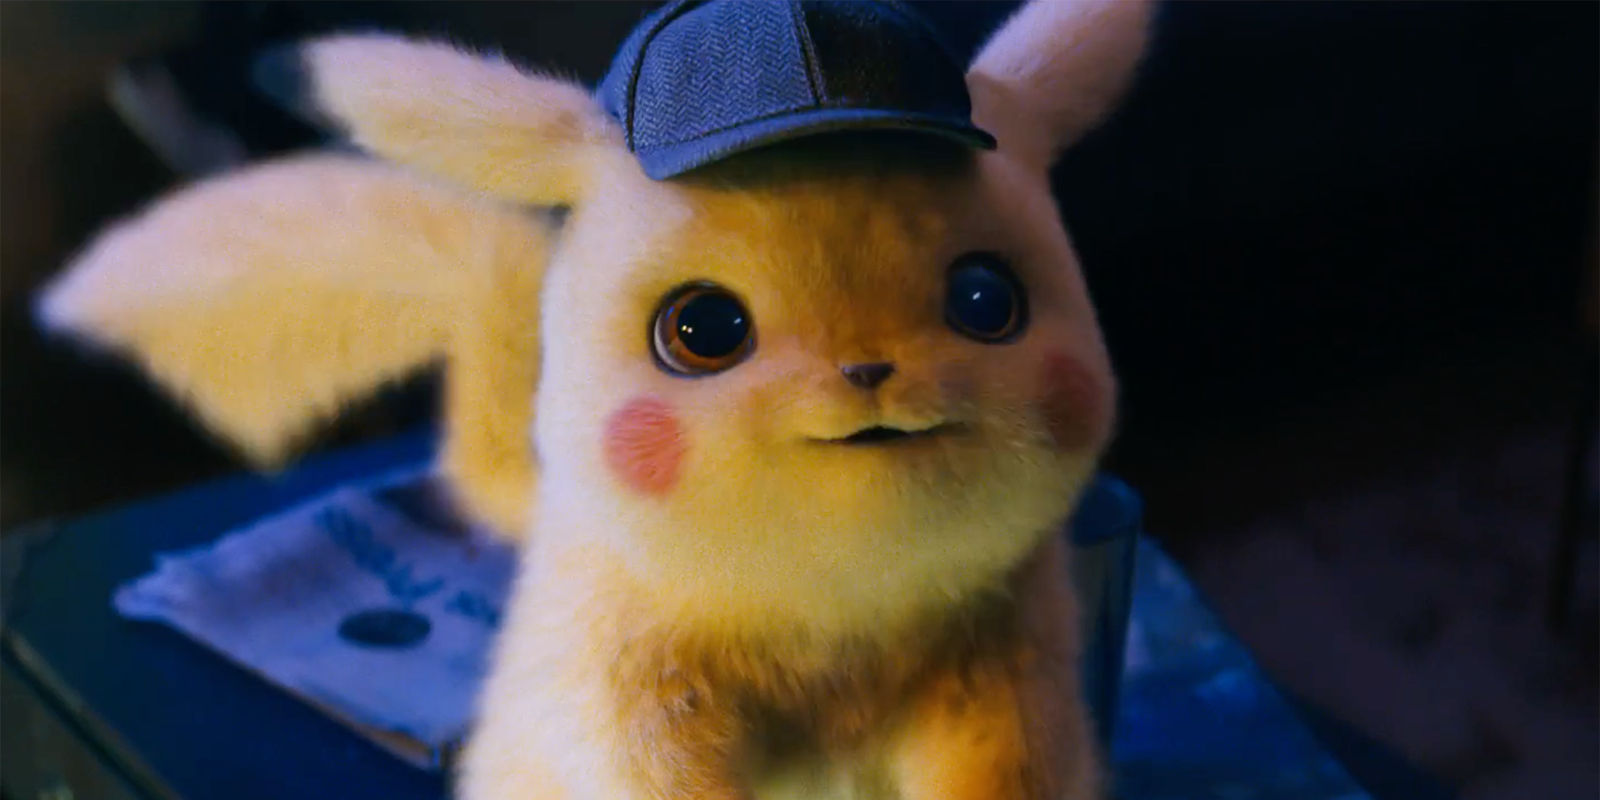 I'm No Pokemon Fan: Why I'm Excited for Detective Pikachu Anyway